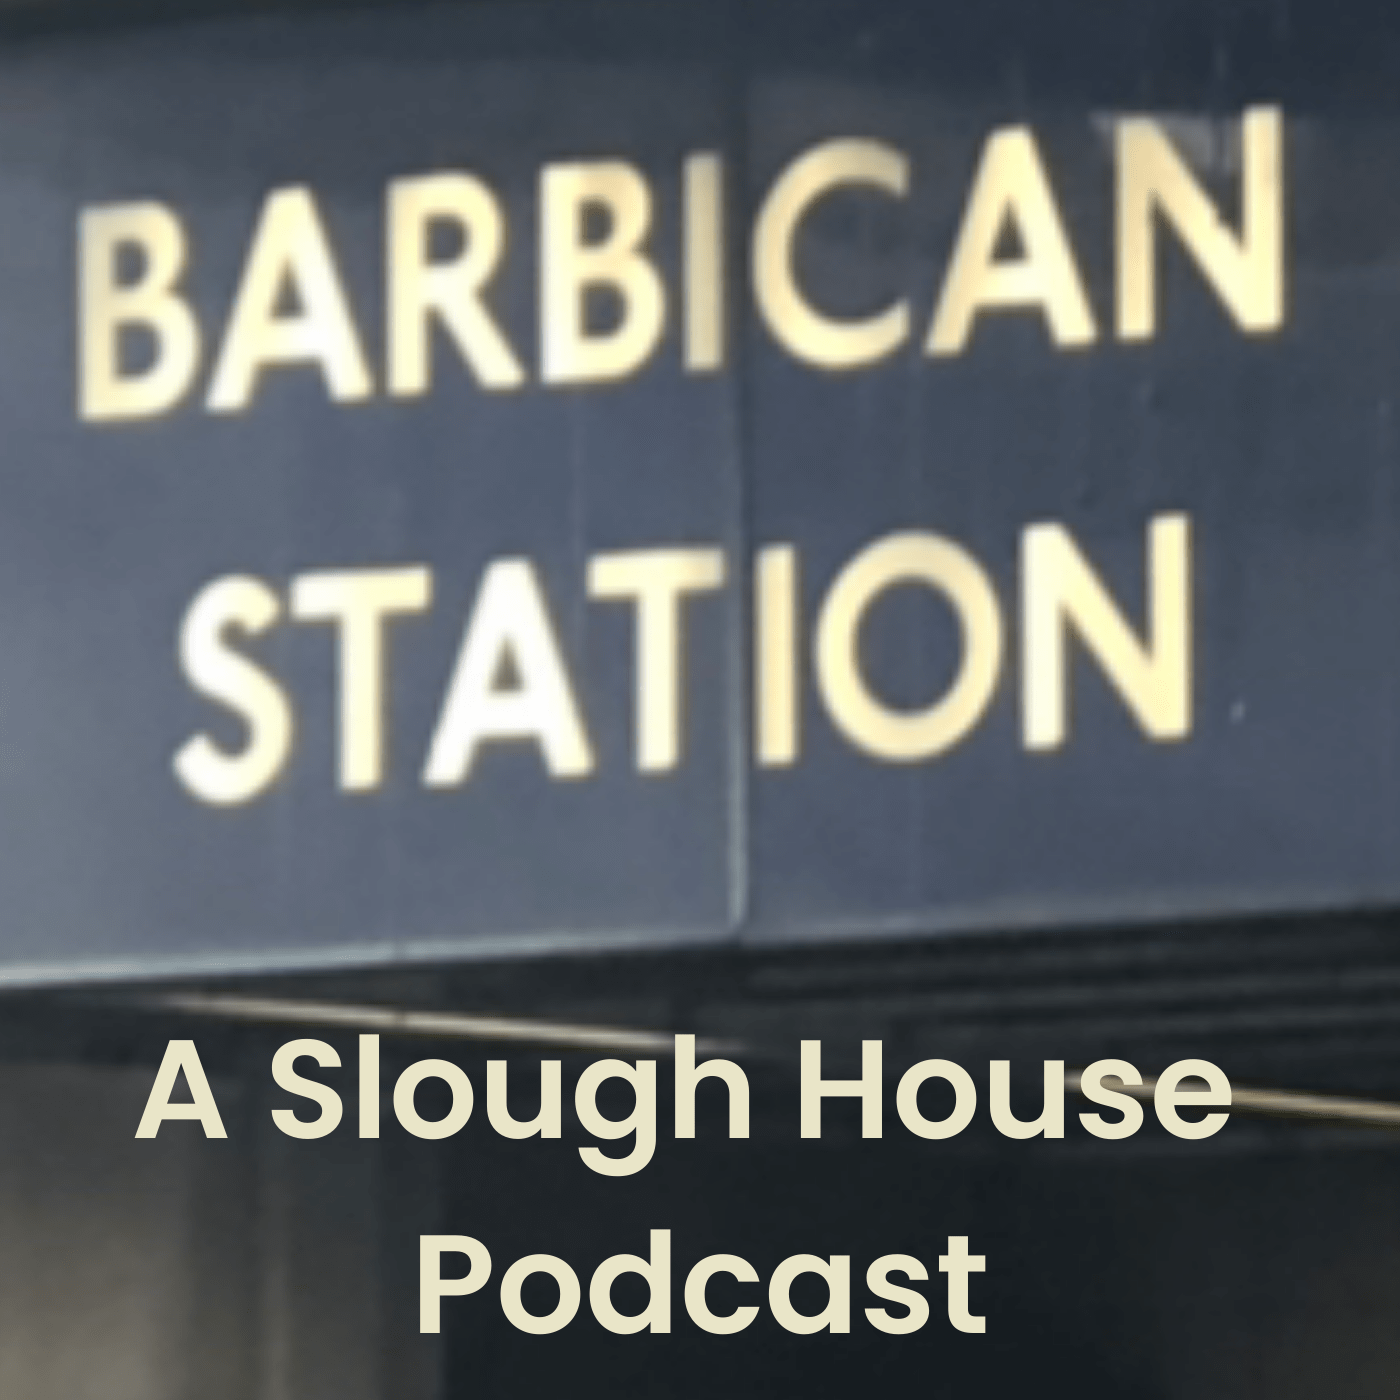 Barbican Station – The Secret Hours by Mick Herron – Review with Tim Shipman